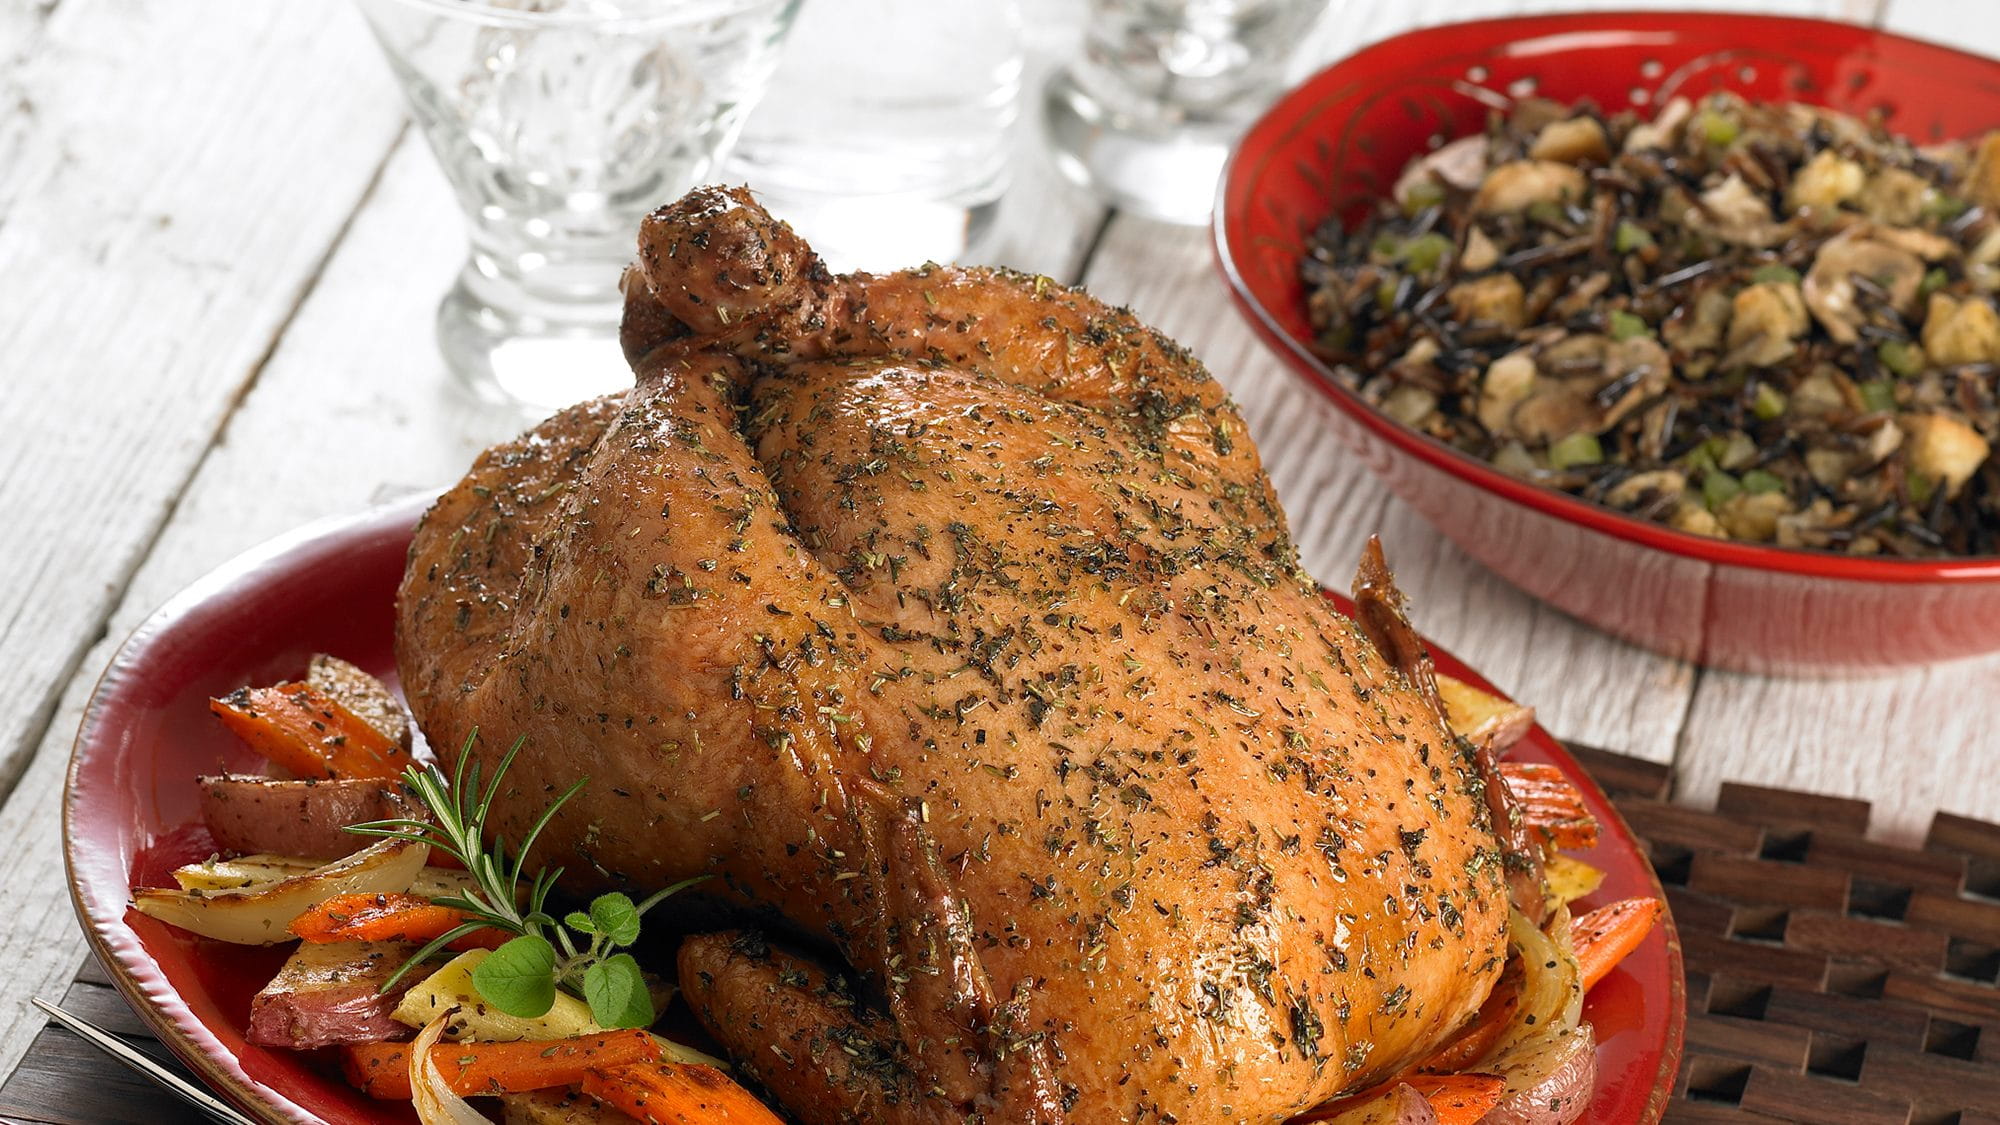 ROASTED CHICKEN WITH HERBES DE PROVENCE